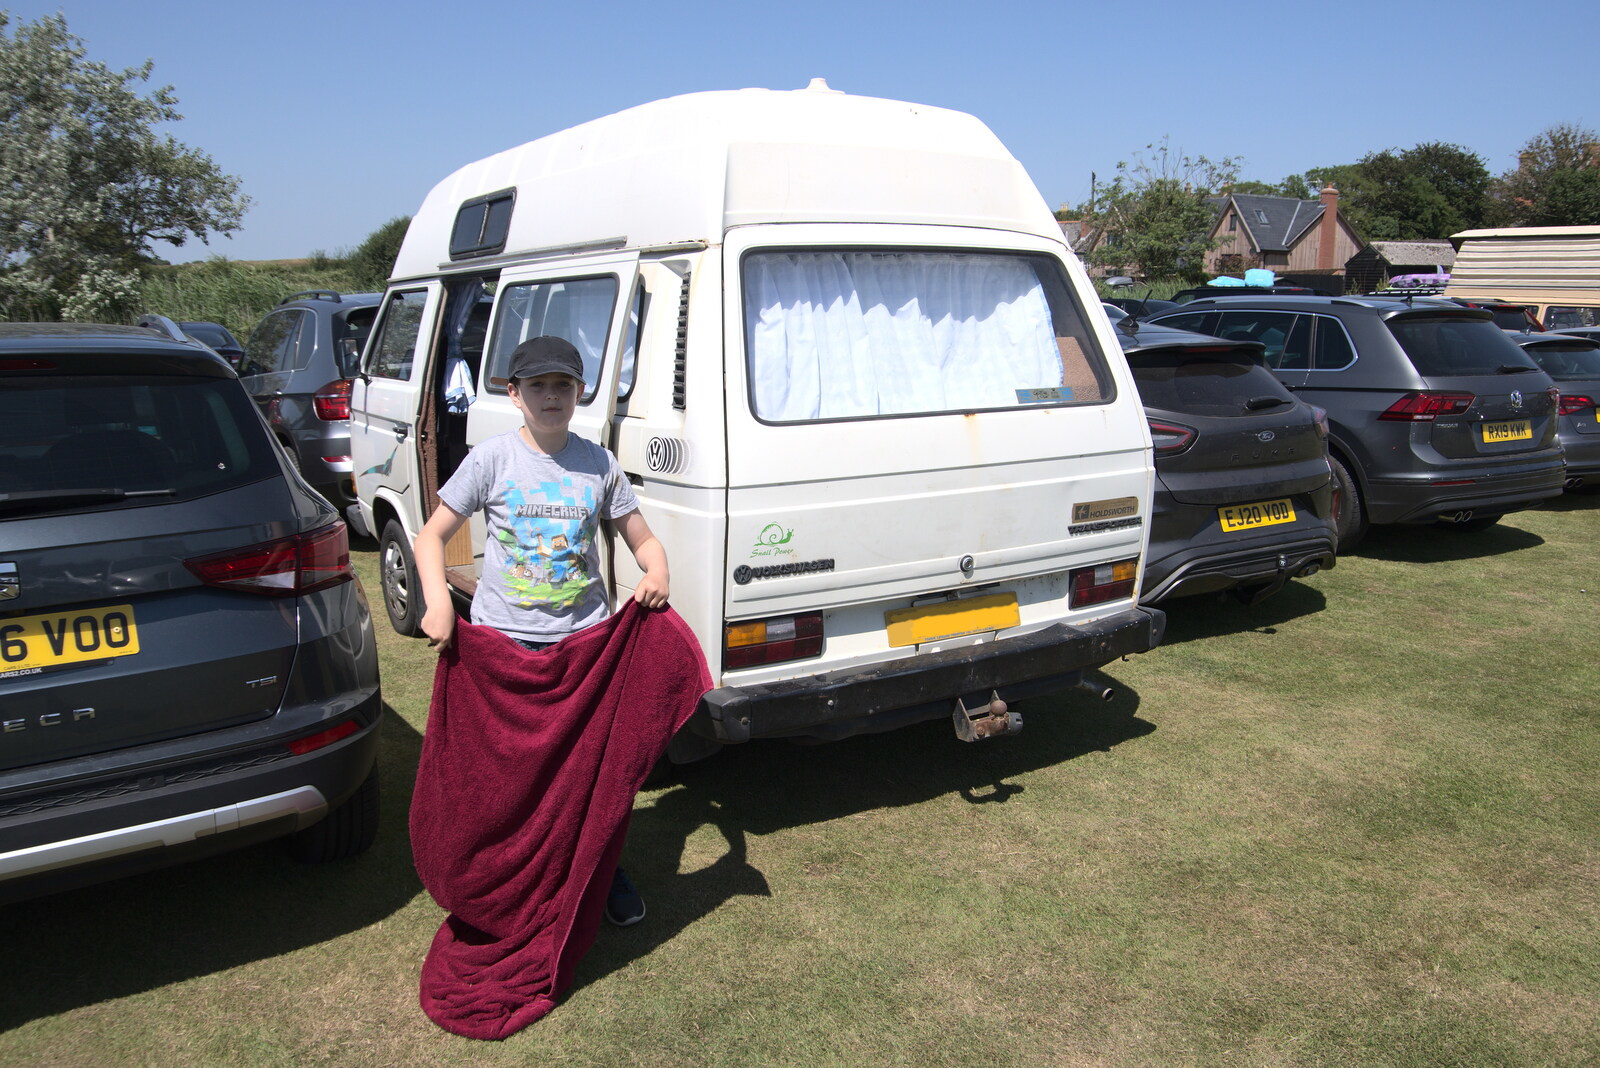 Fred shakes out a towel by the van from A Day on the Beach, Southwold, Suffolk - 18th July 2021